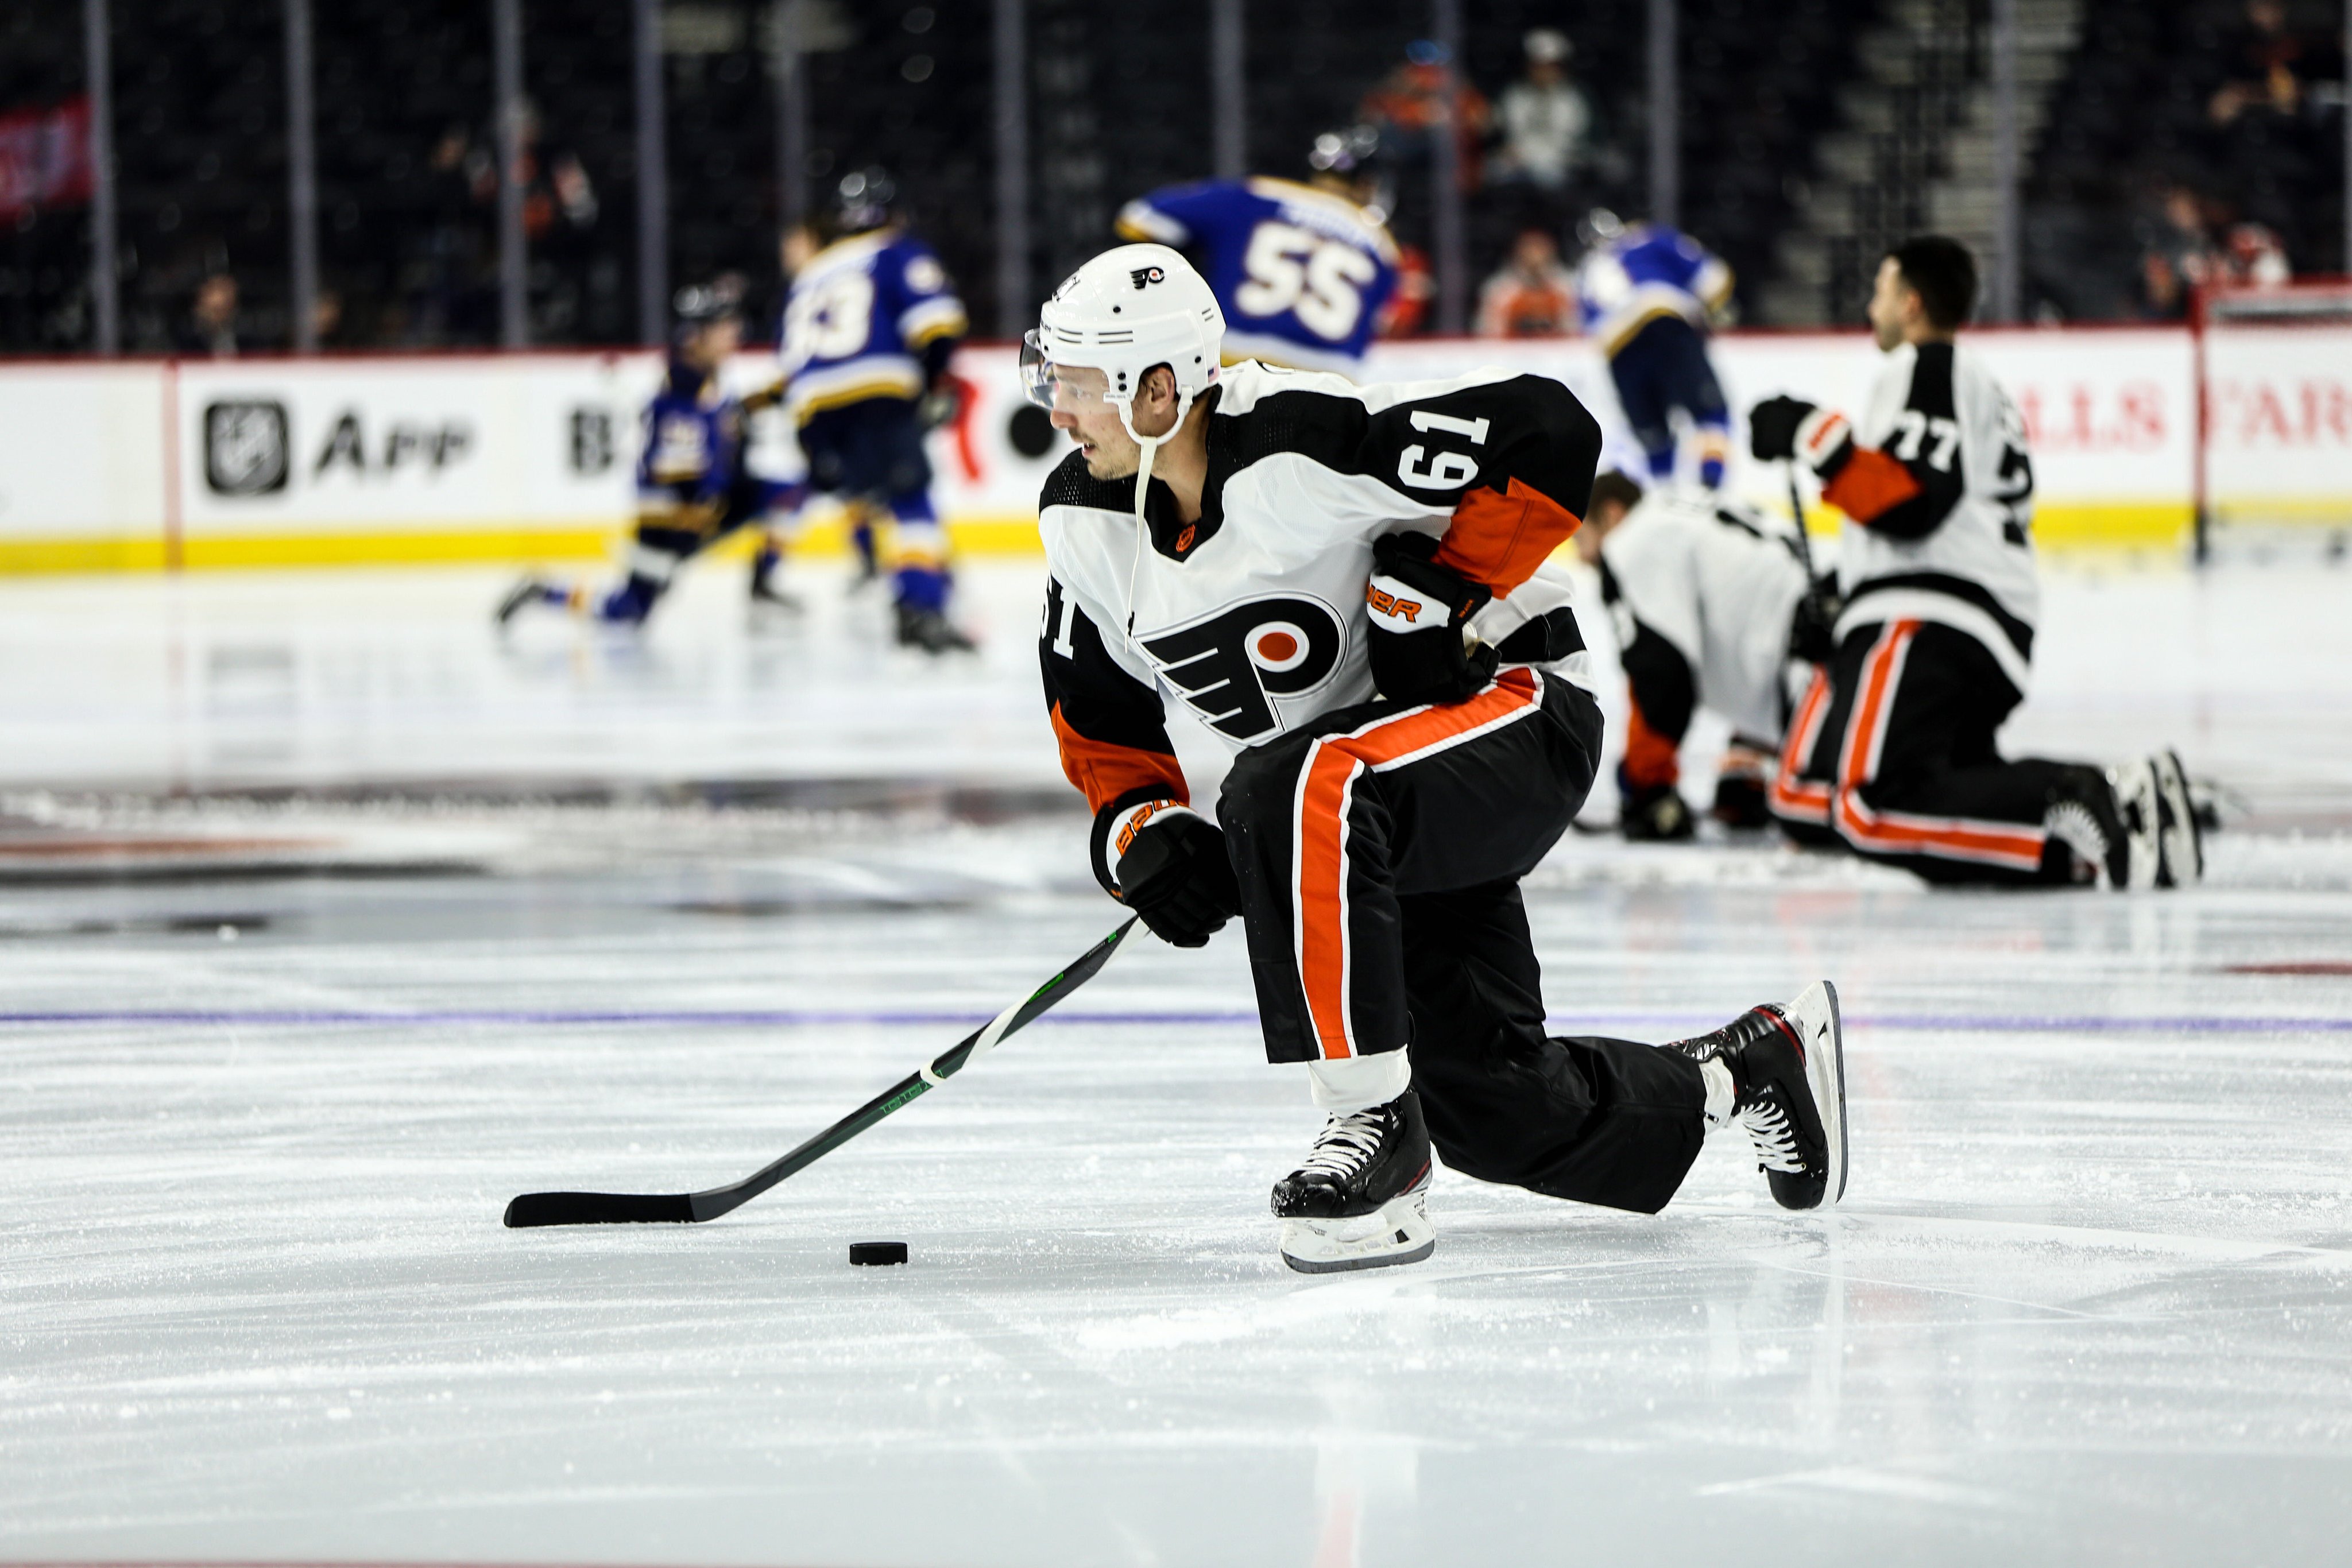 Flyers take warmups in 'Cooperalls' ahead of game vs. Blues